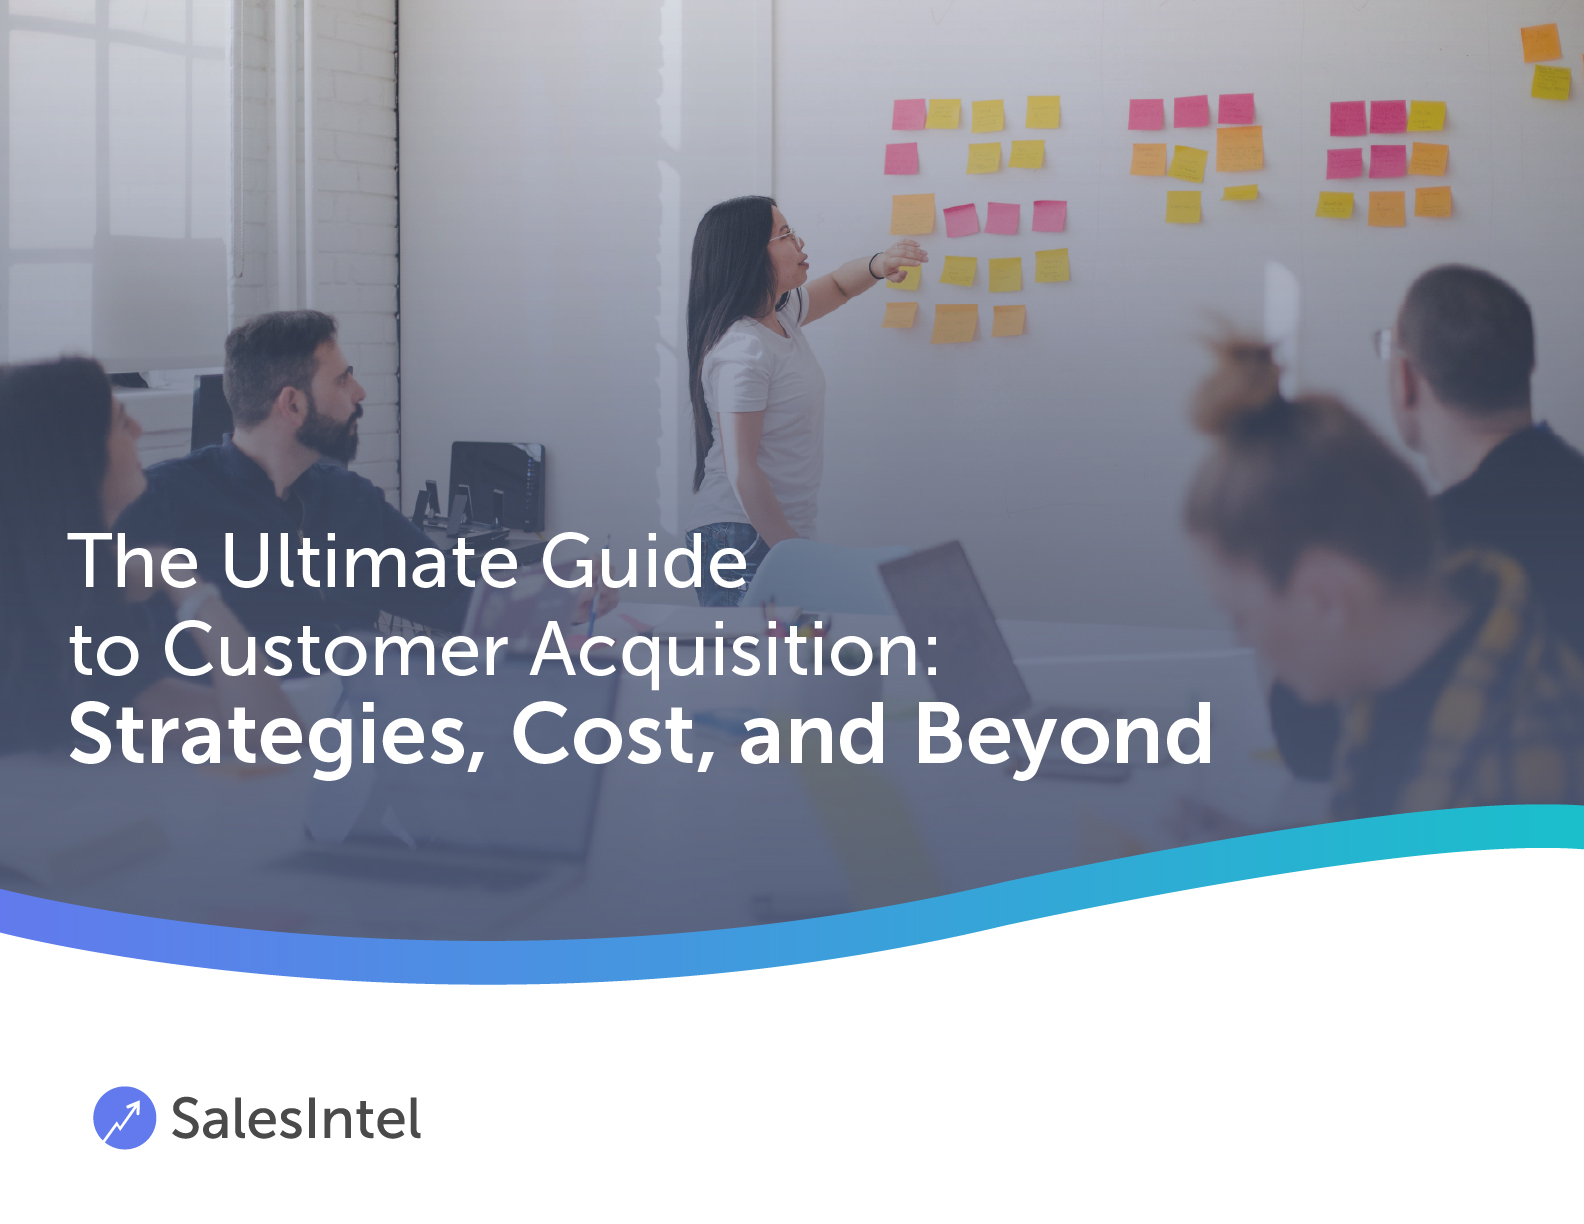 The Ultimate Guide to Customer Acquisition- Strategies, Cost, and Beyond